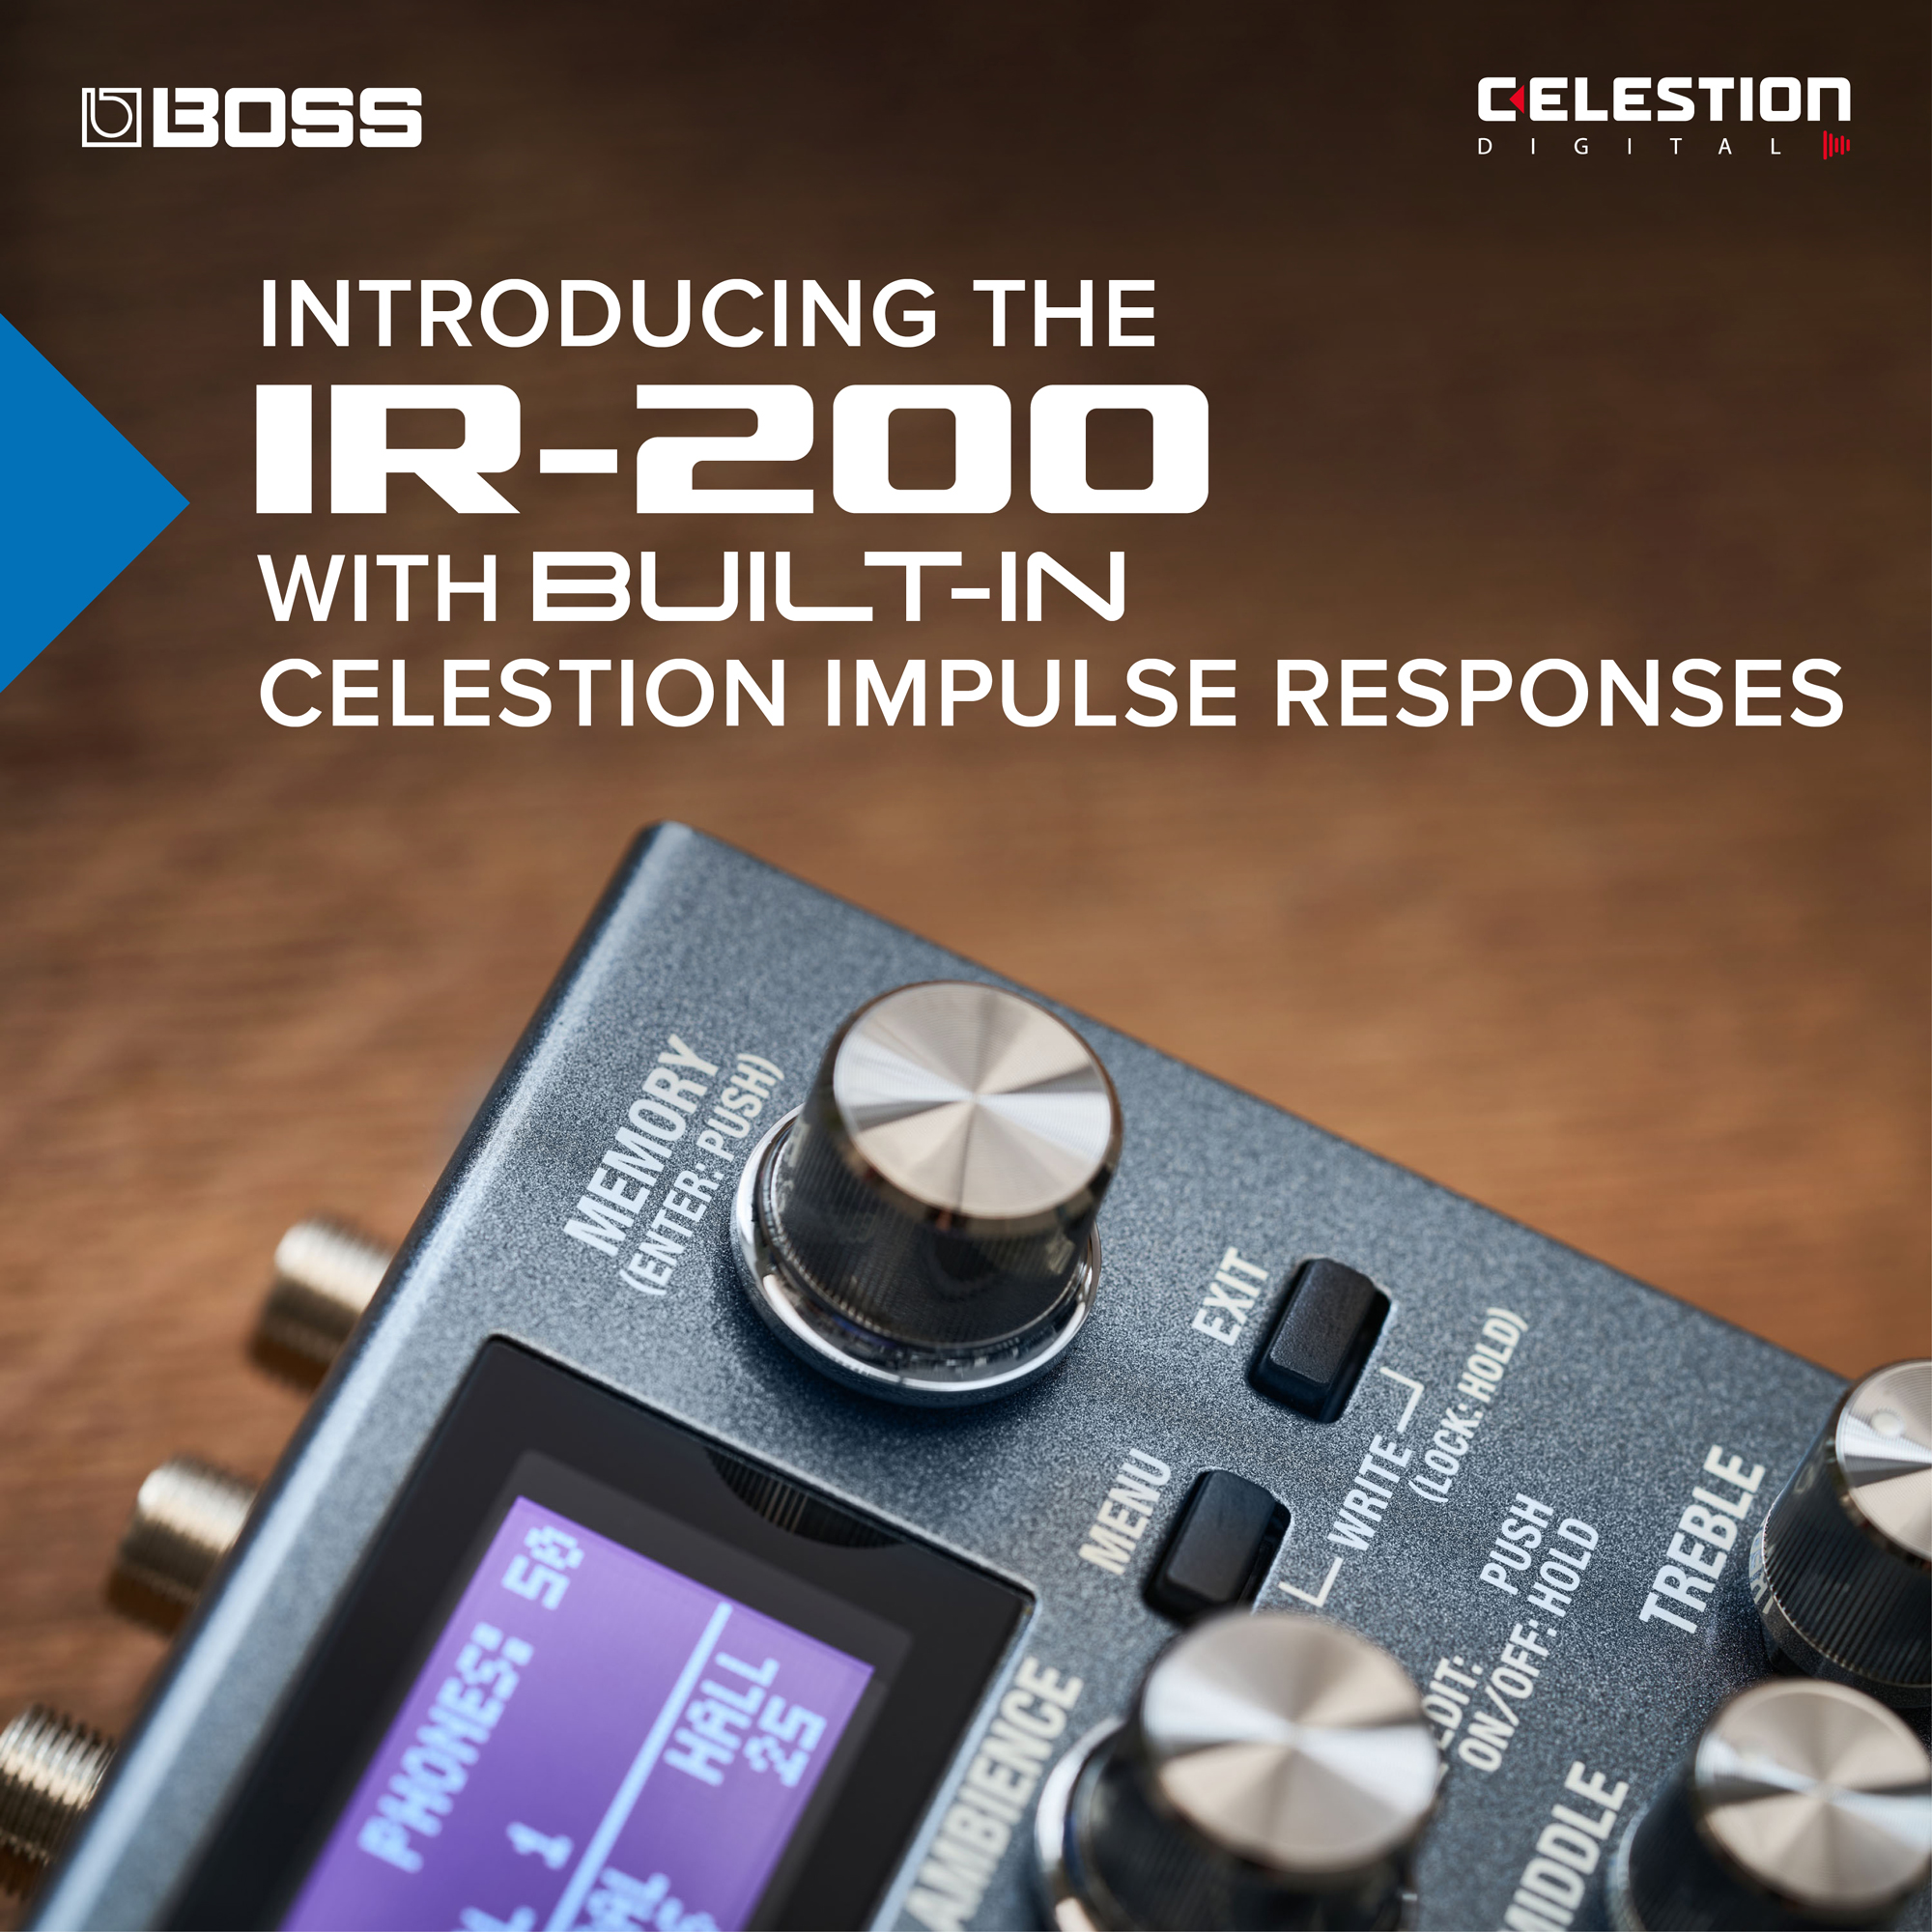 Celestion Impulse Responses Included in the new BOSS IR-200 Amp